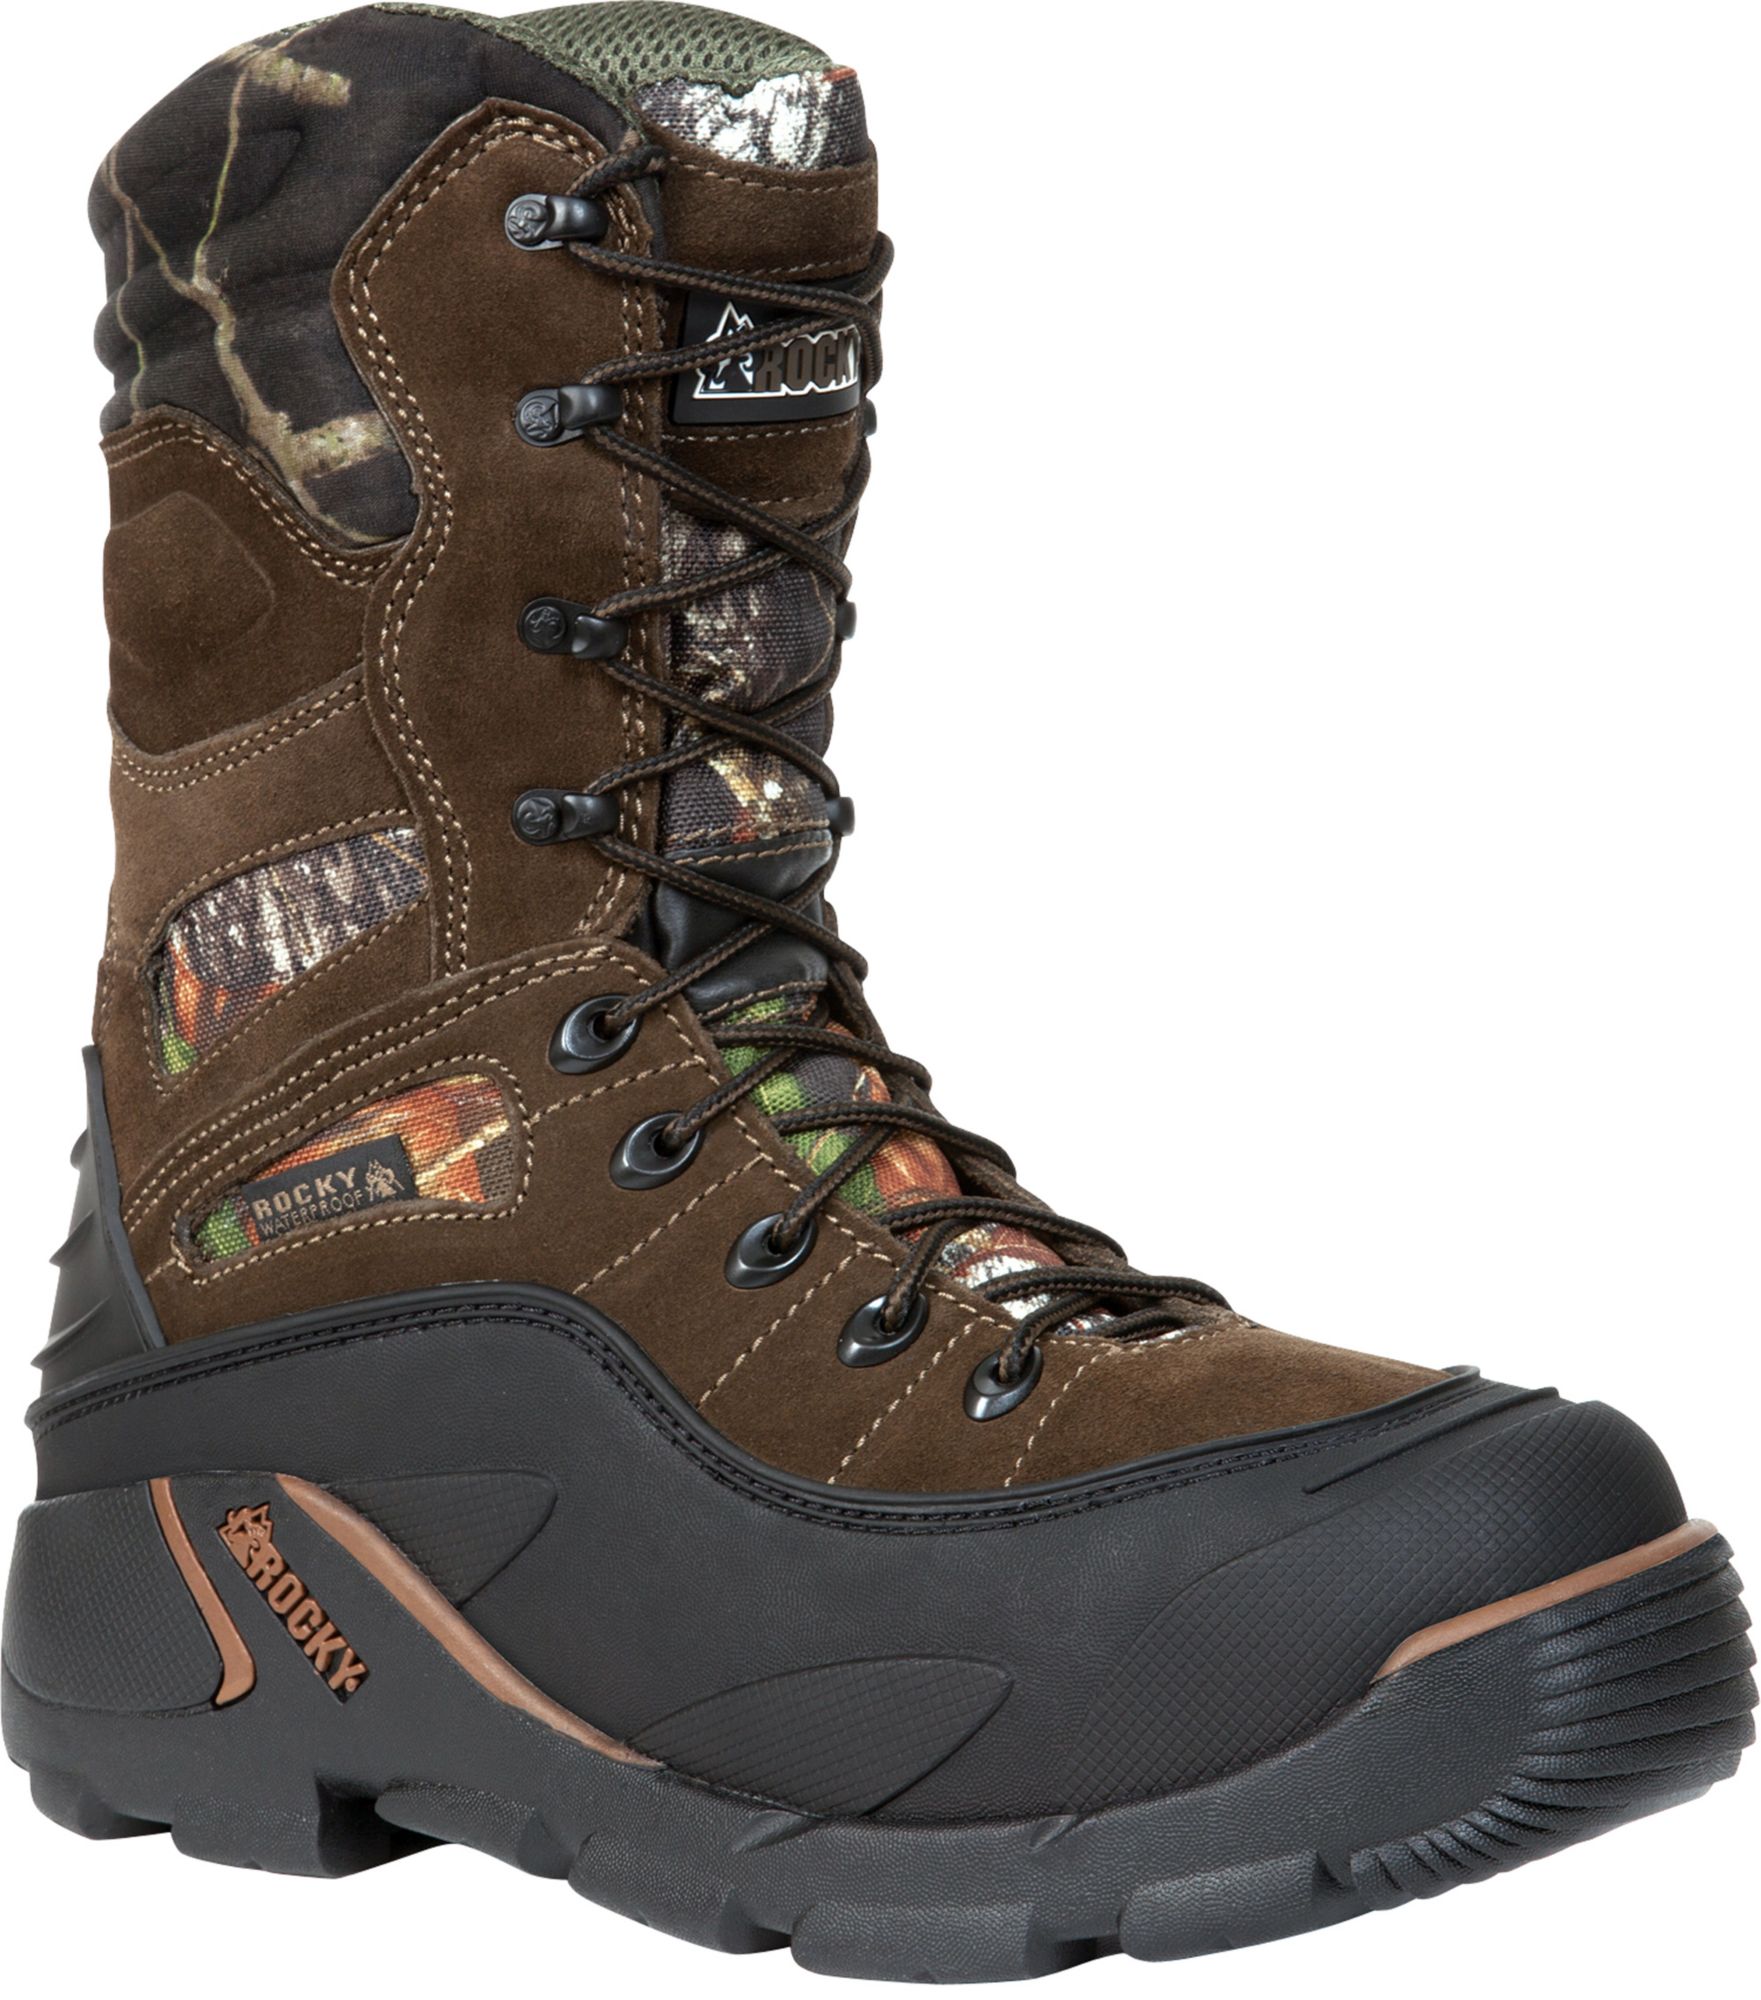 rocky snow stalker extreme boots